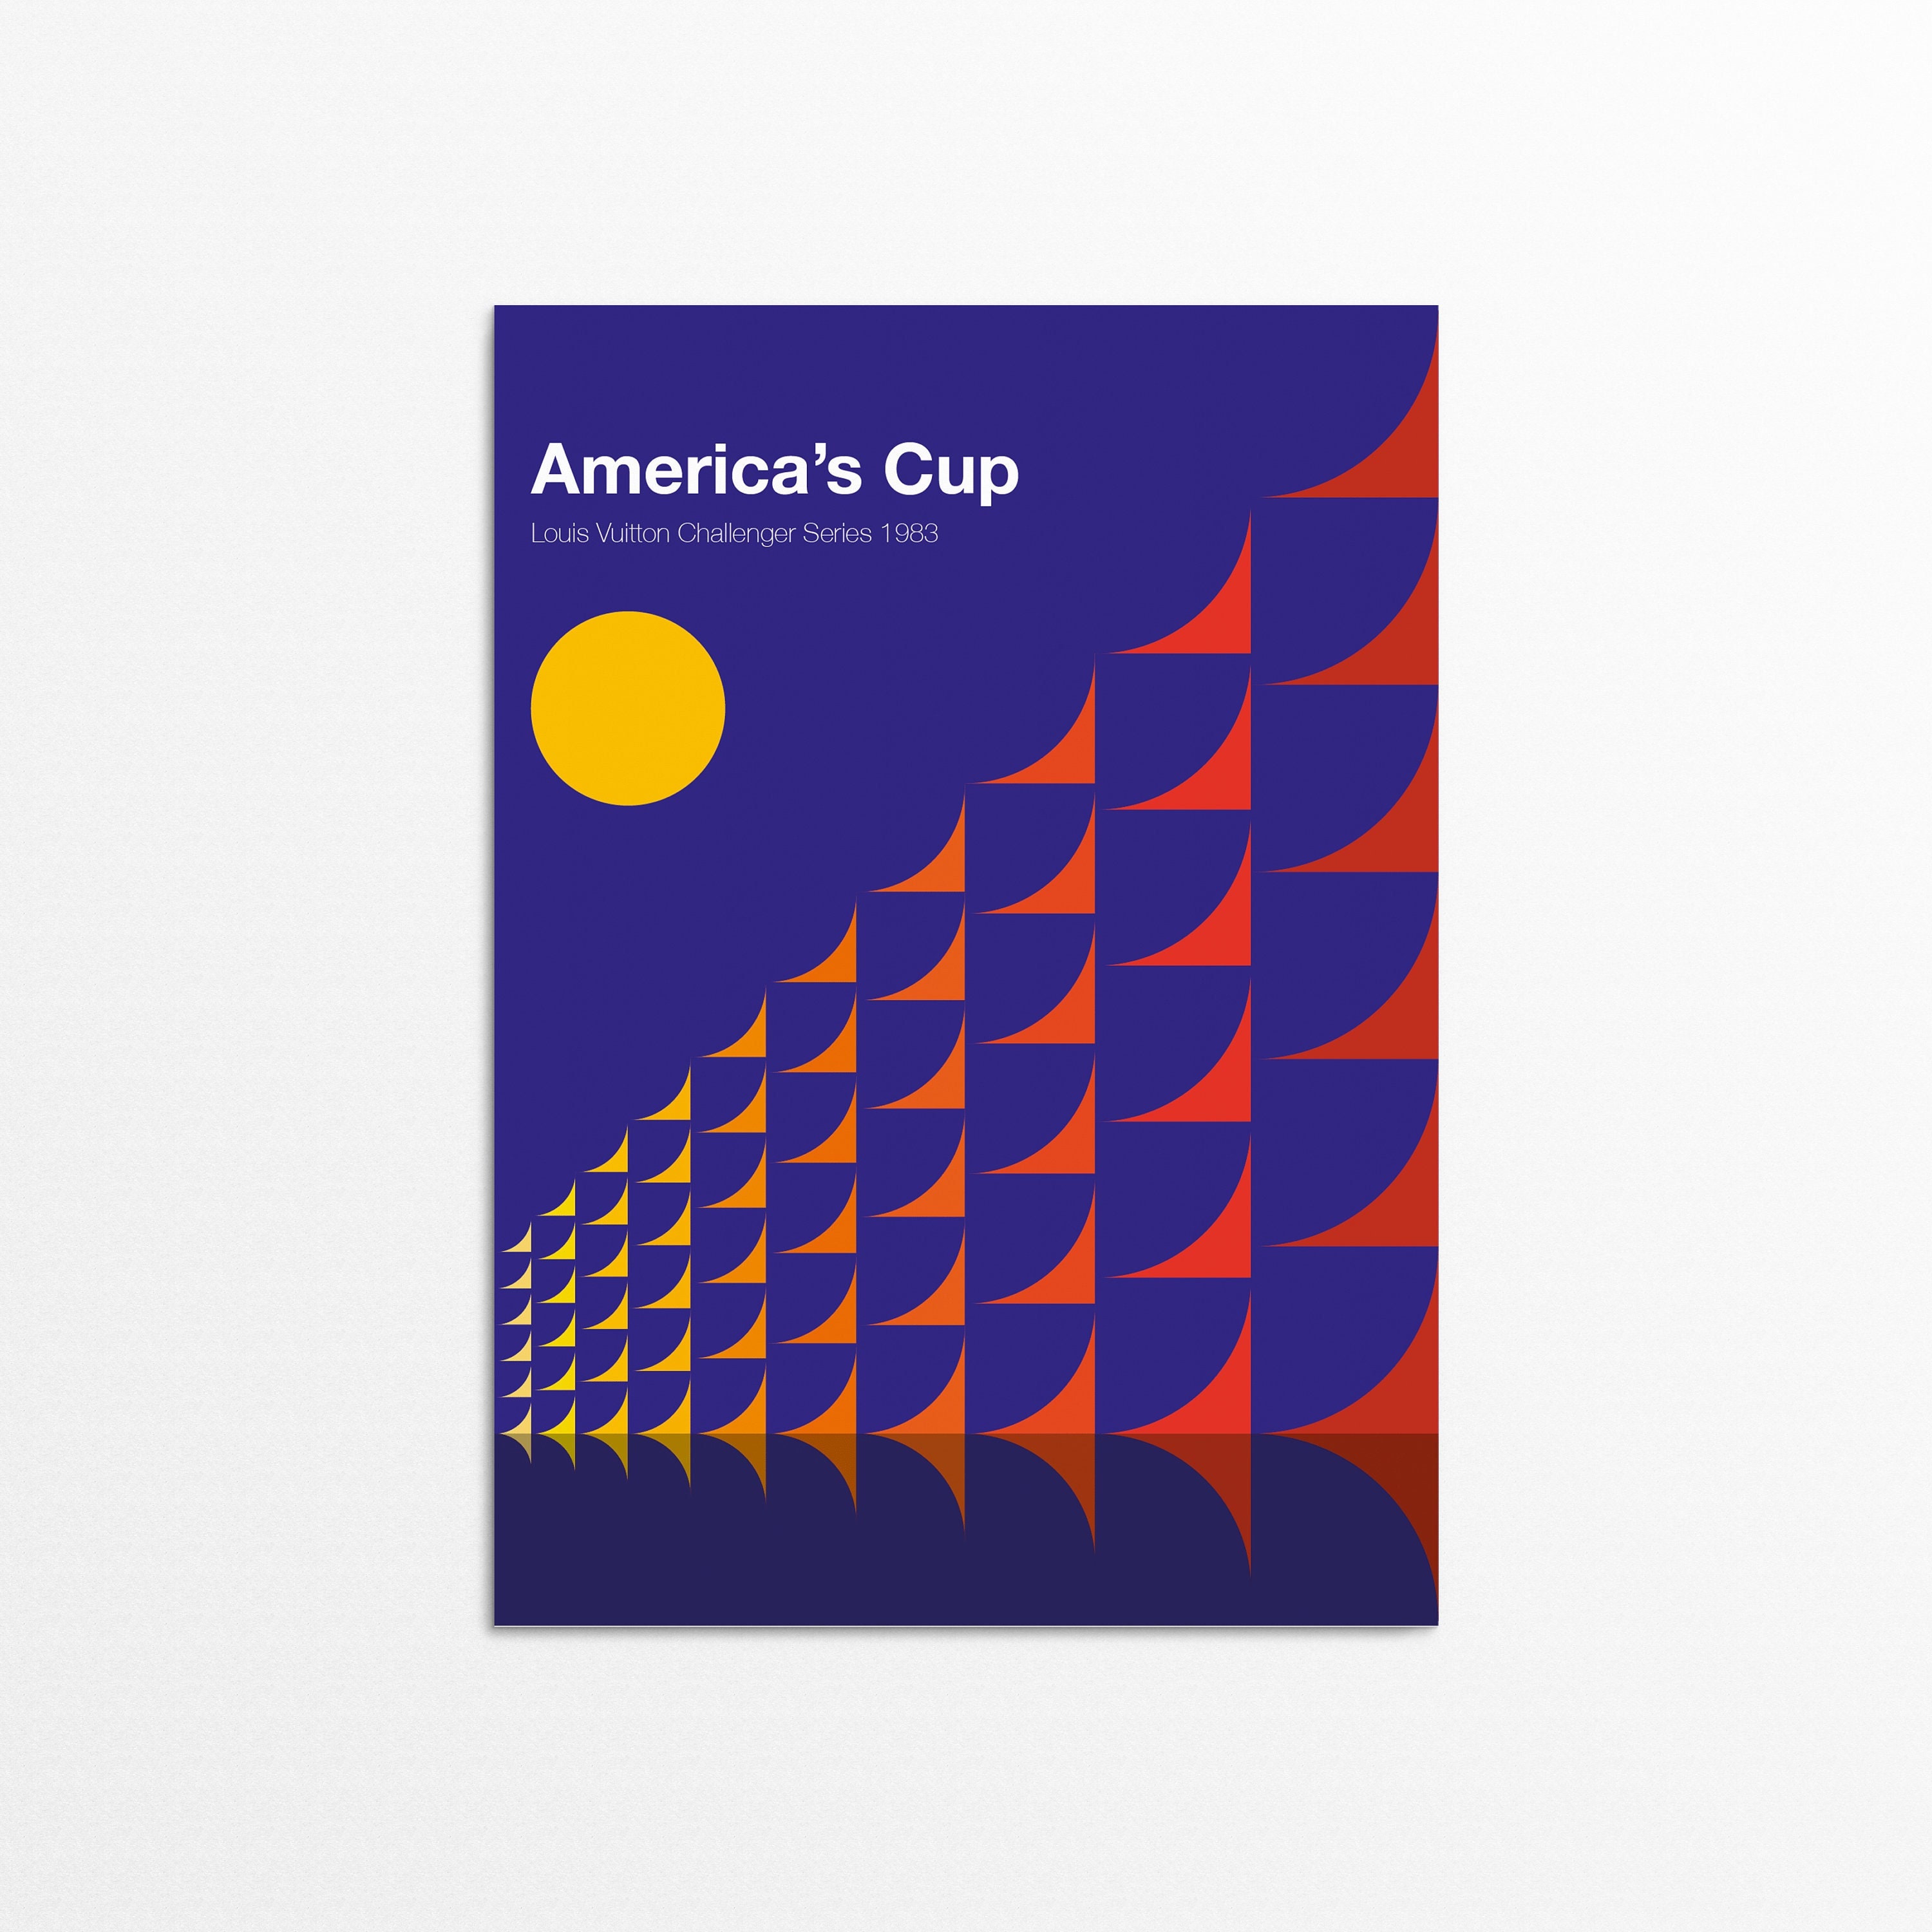 America's Cup Match - 1 Poster